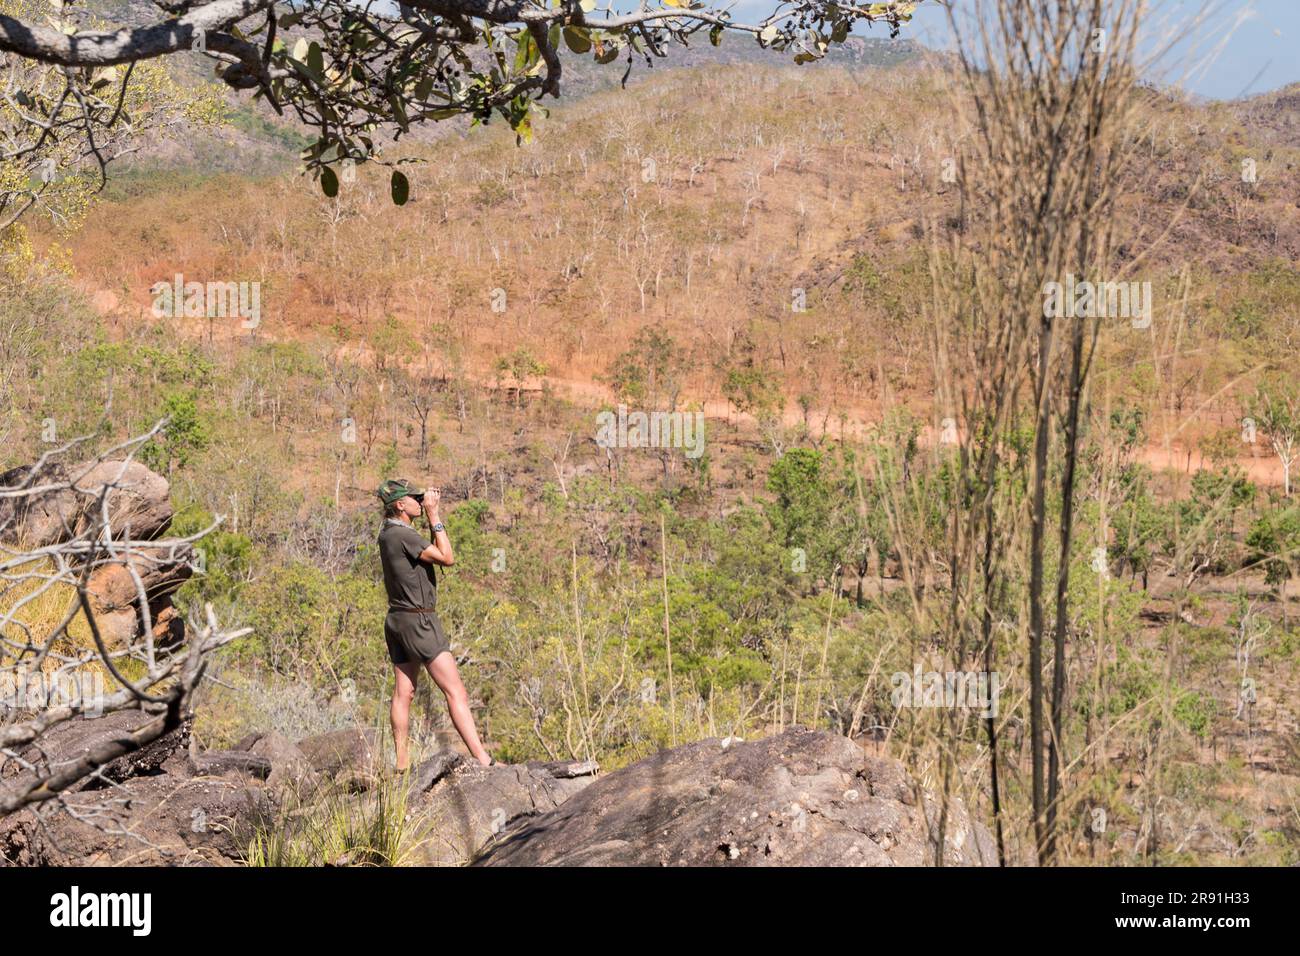 A woman in a sun hat looks through binoculars from a walking trail in the outback in Australia Stock Photo